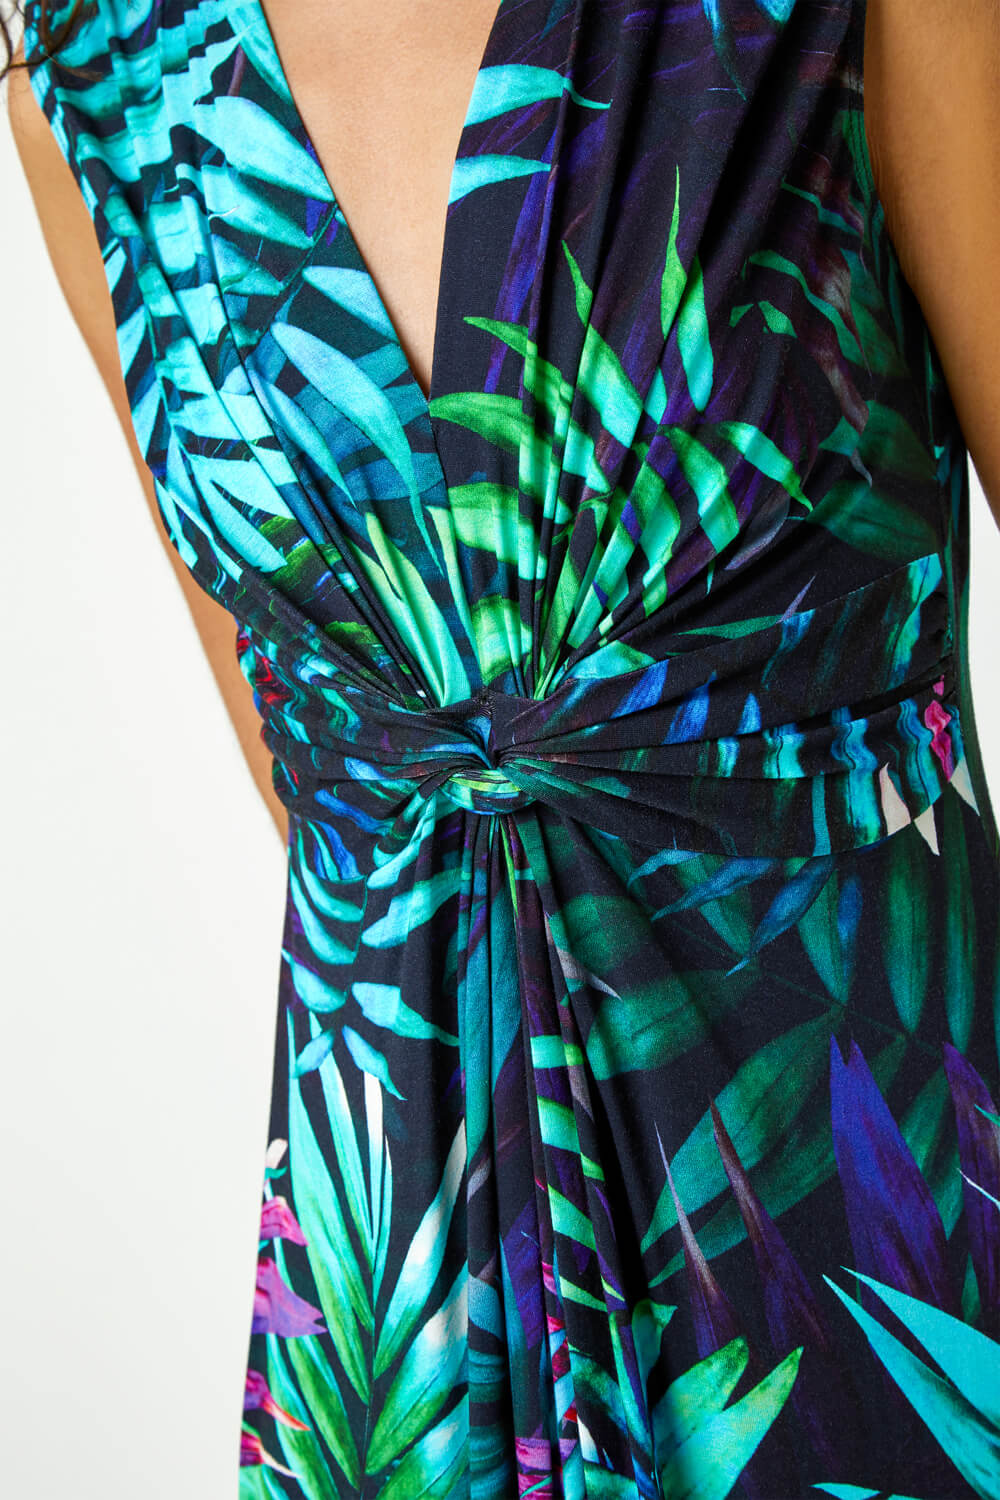 Turquoise Tropical Print Maxi Dress, Image 5 of 6